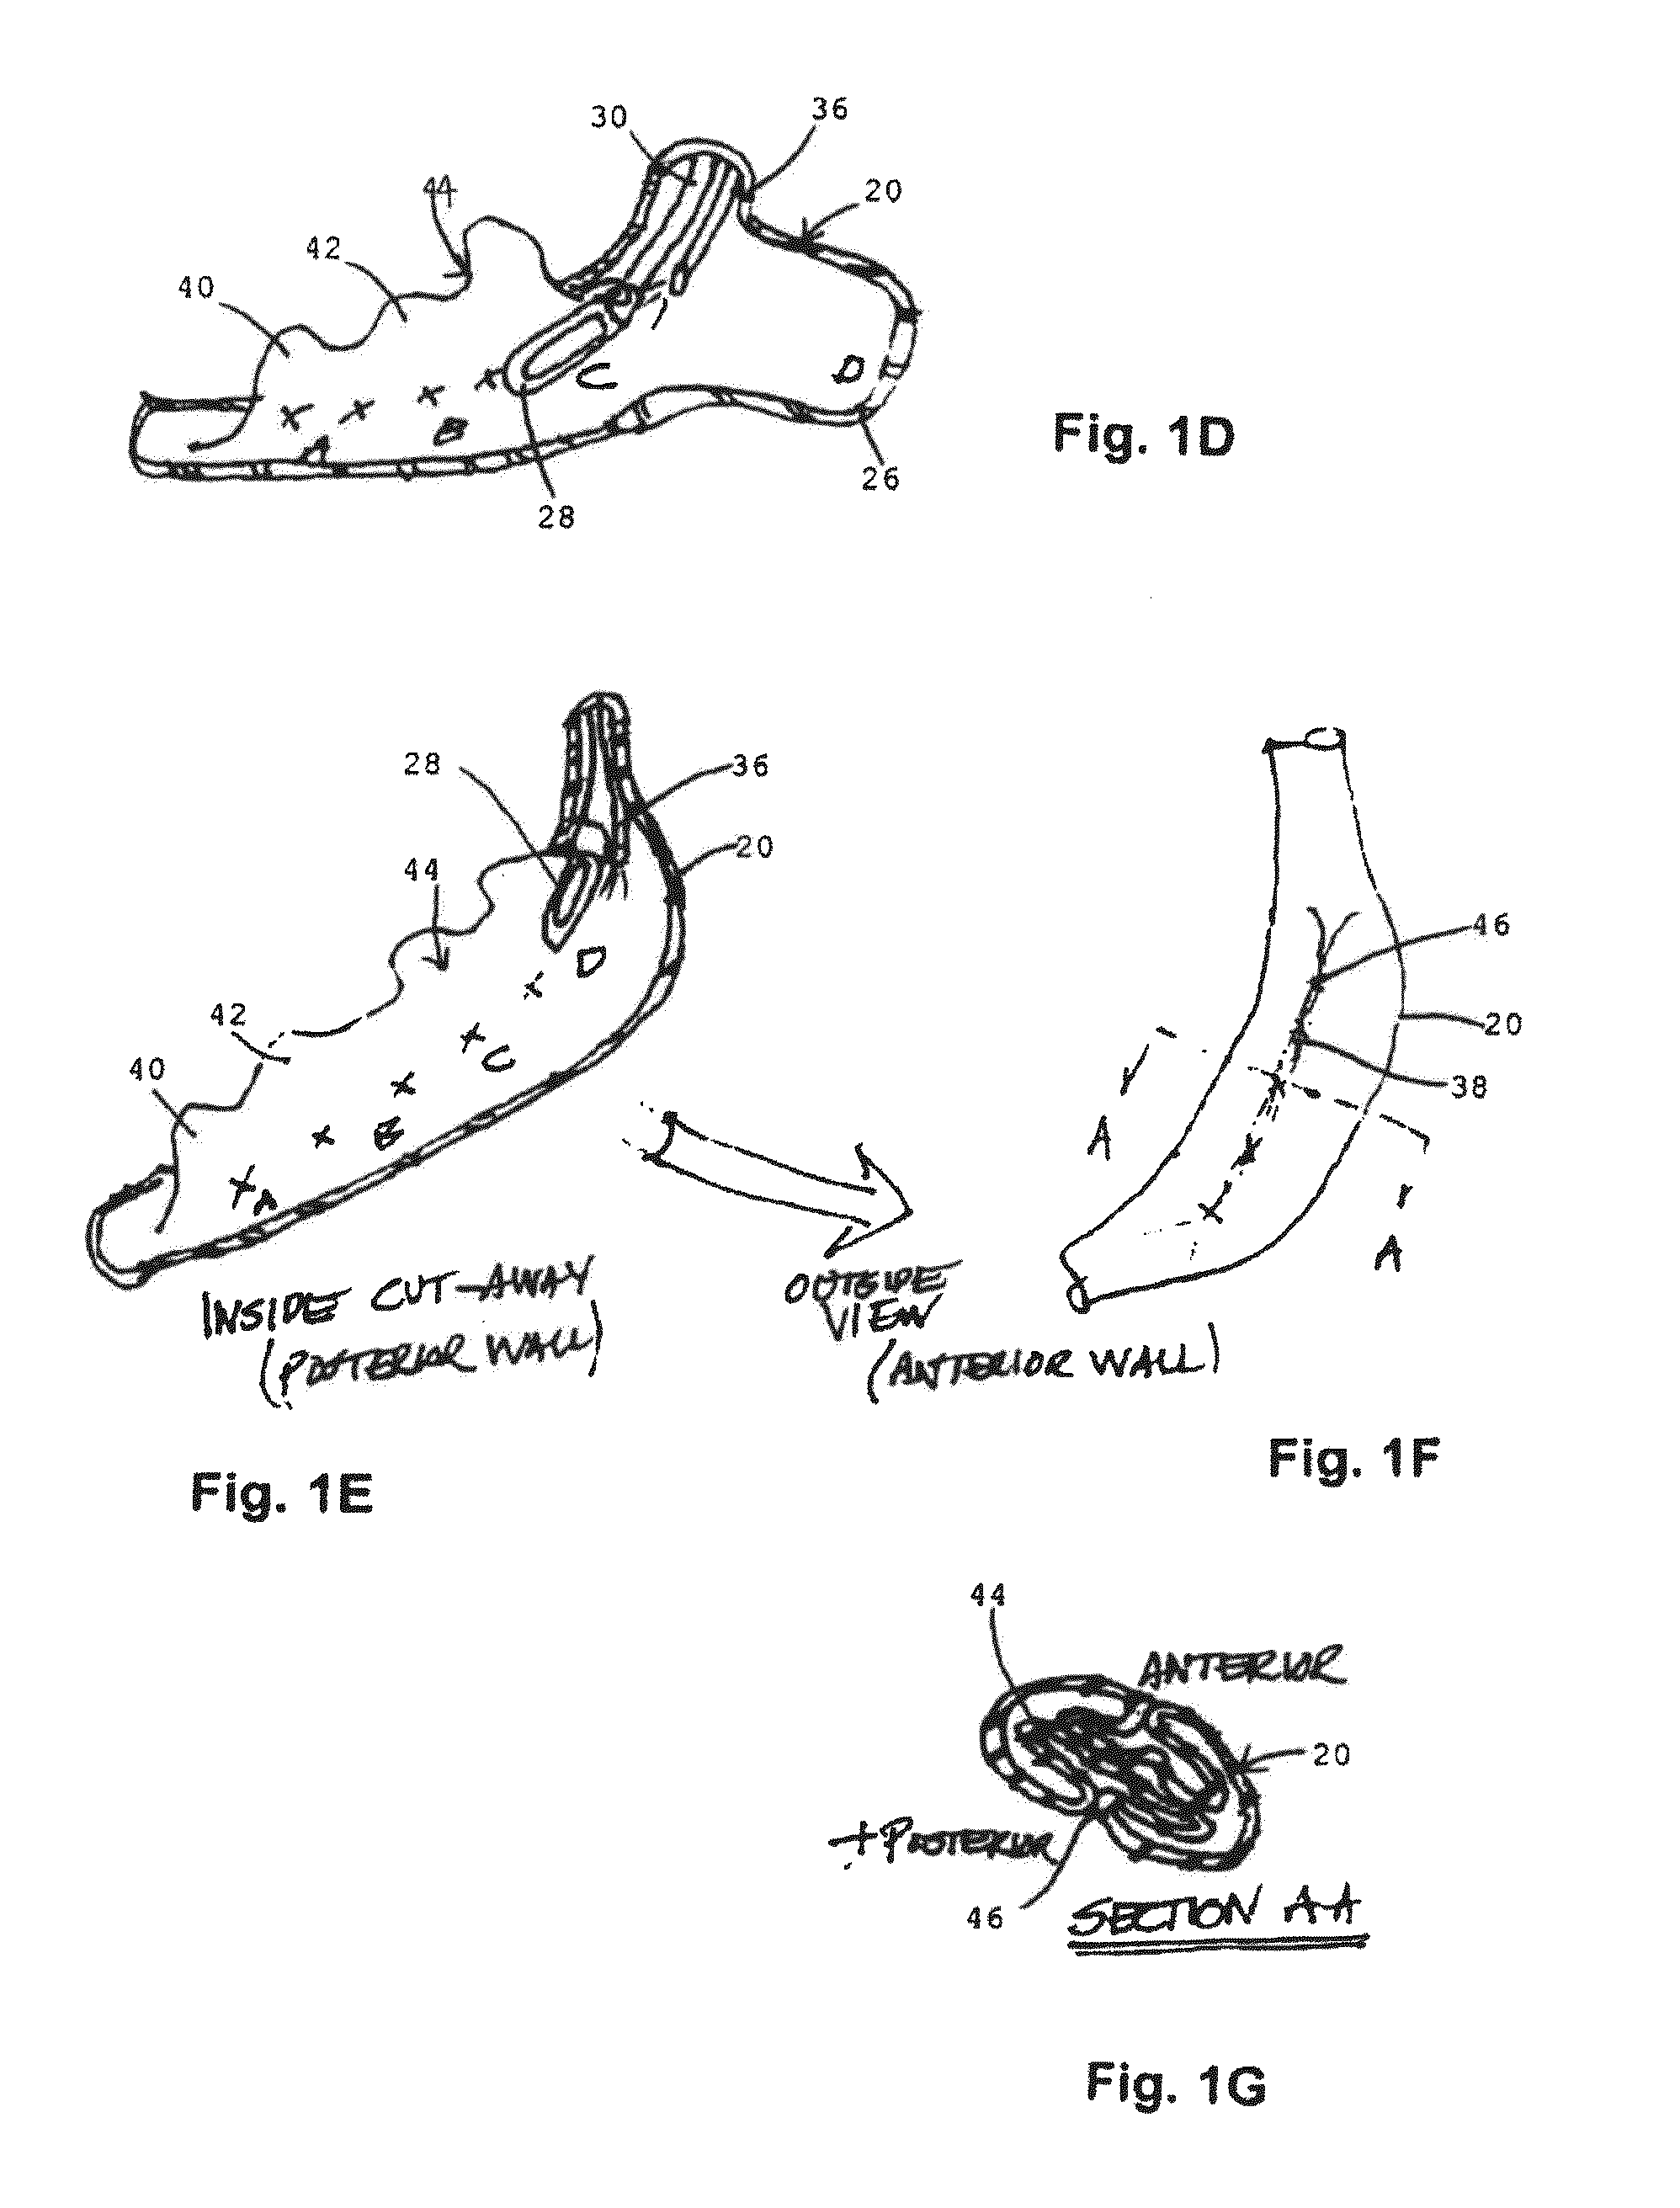 Tissue-acquisition and fastening devices and methods